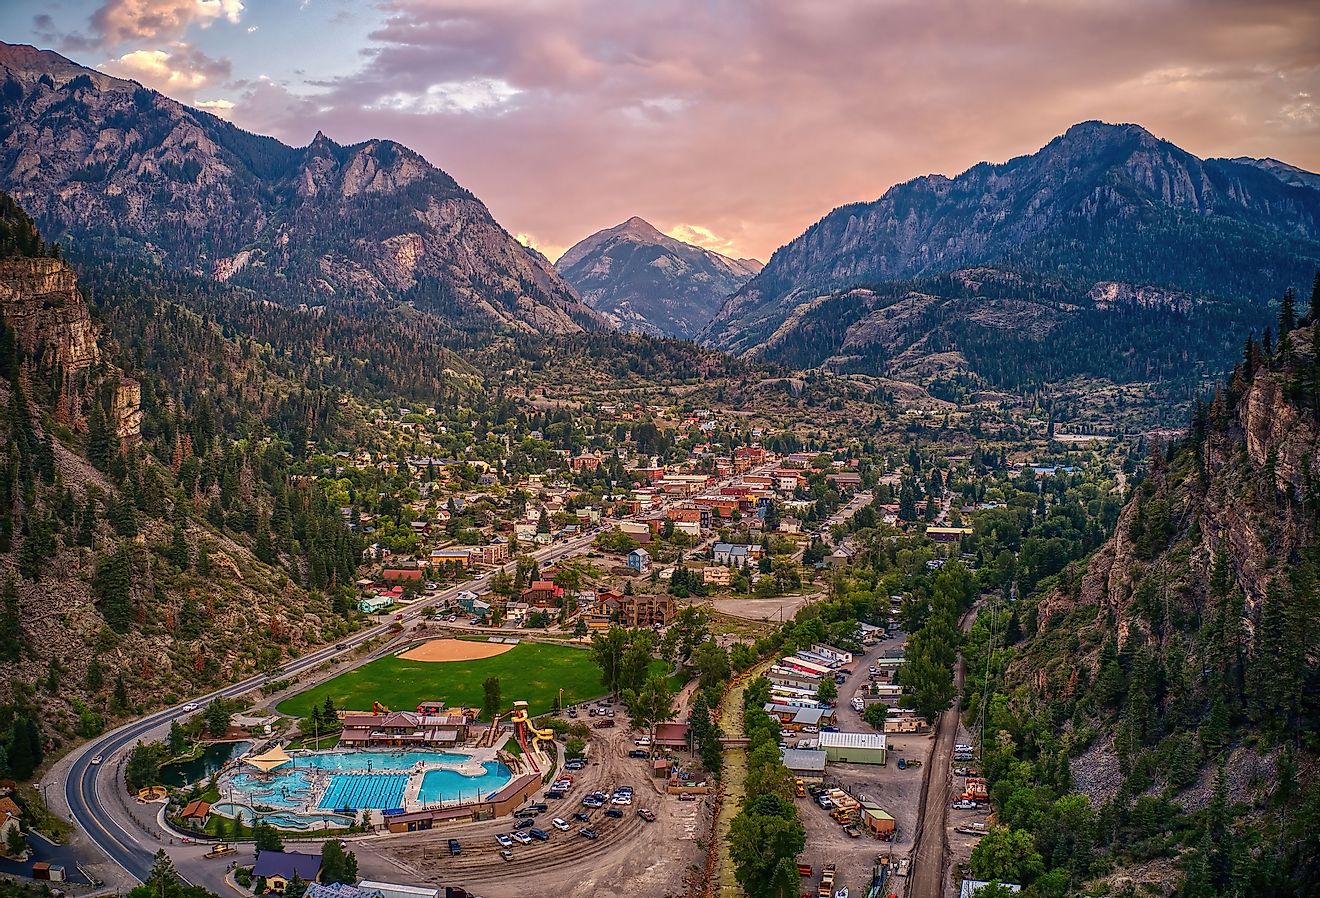 Aerial view of Ouray, a small Mountain Town with a Hot Springs Aquatic Center